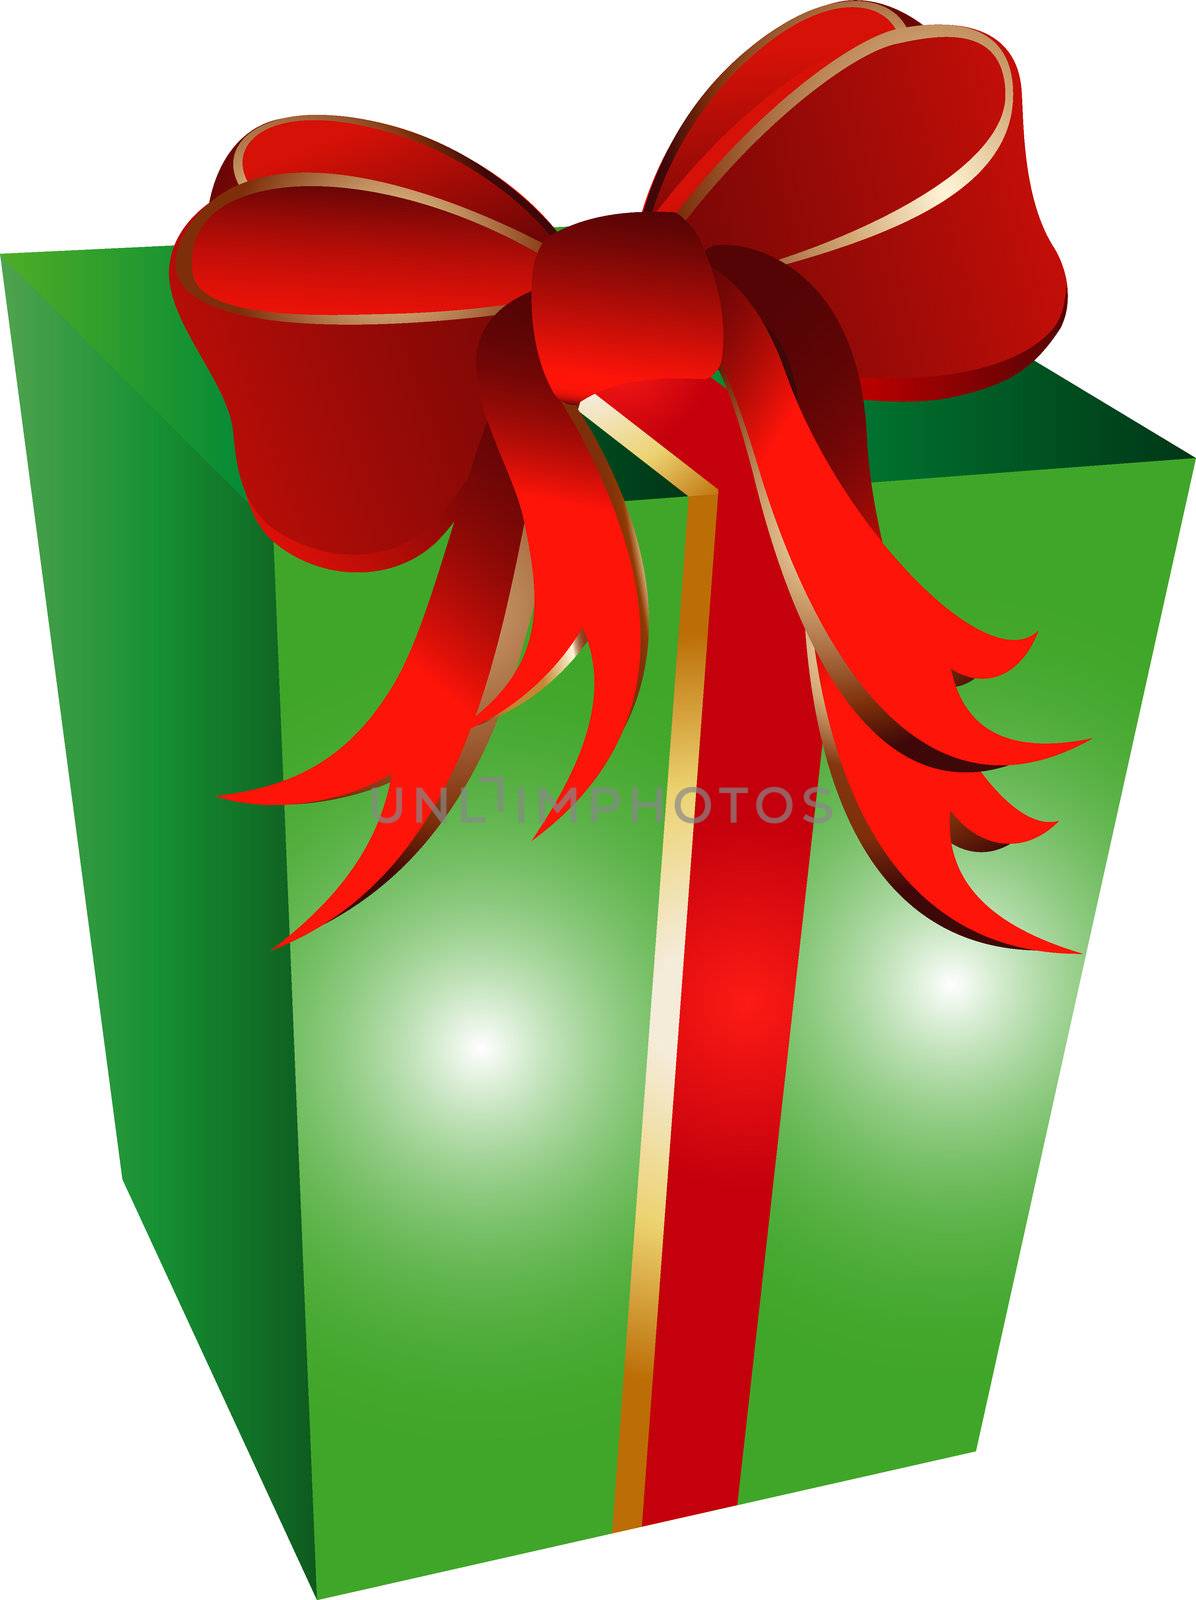 green present with red ribbon by peromarketing